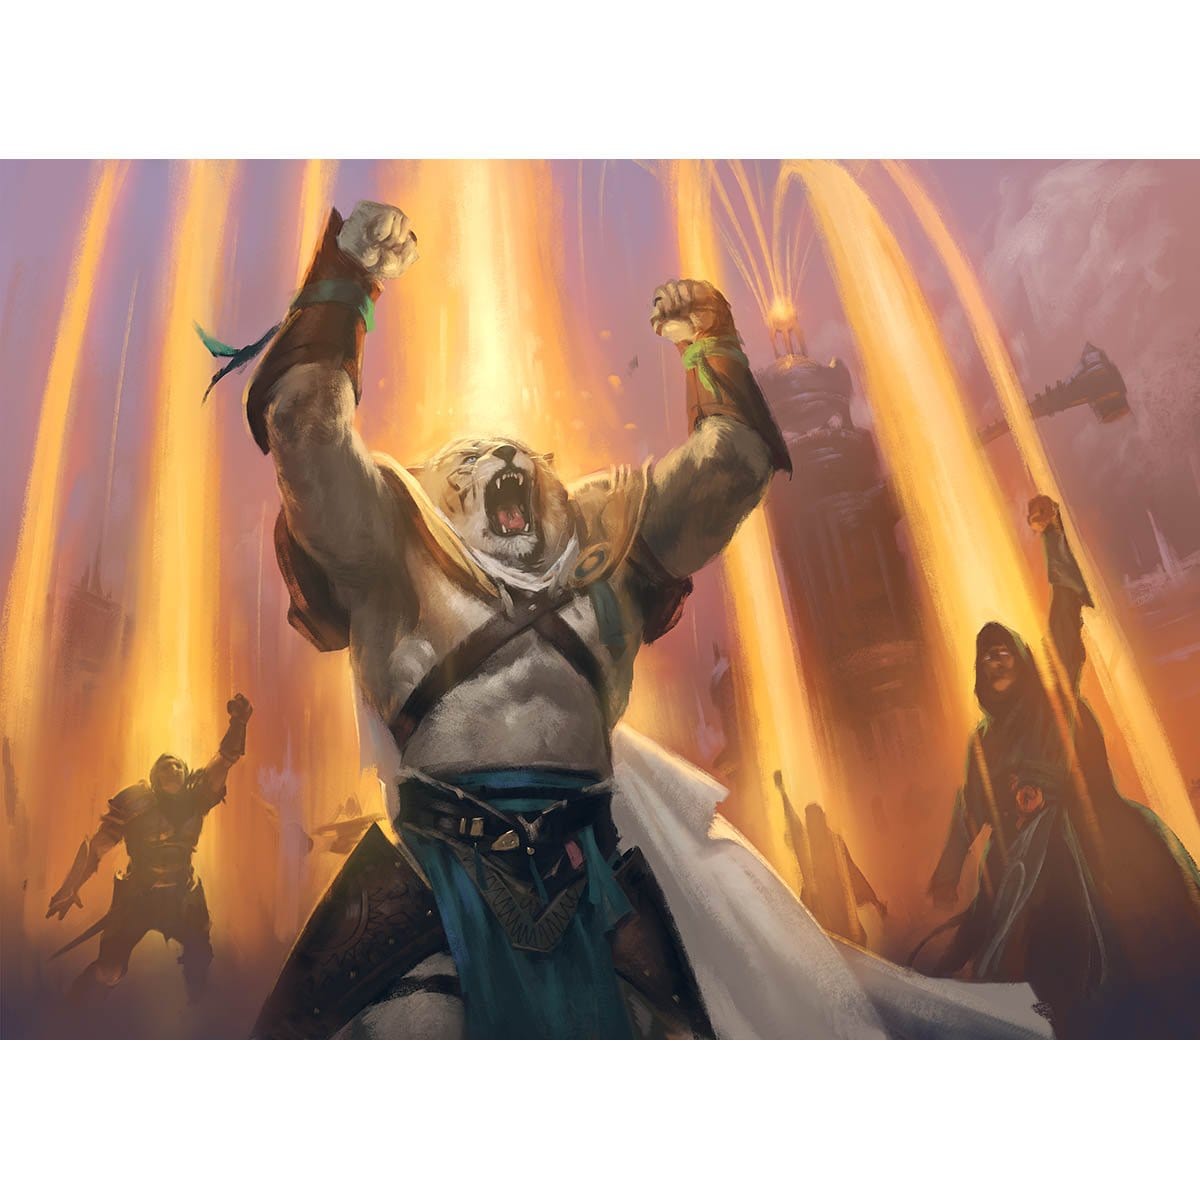 Ignite the Beacon Print - Print - Original Magic Art - Accessories for Magic the Gathering and other card games